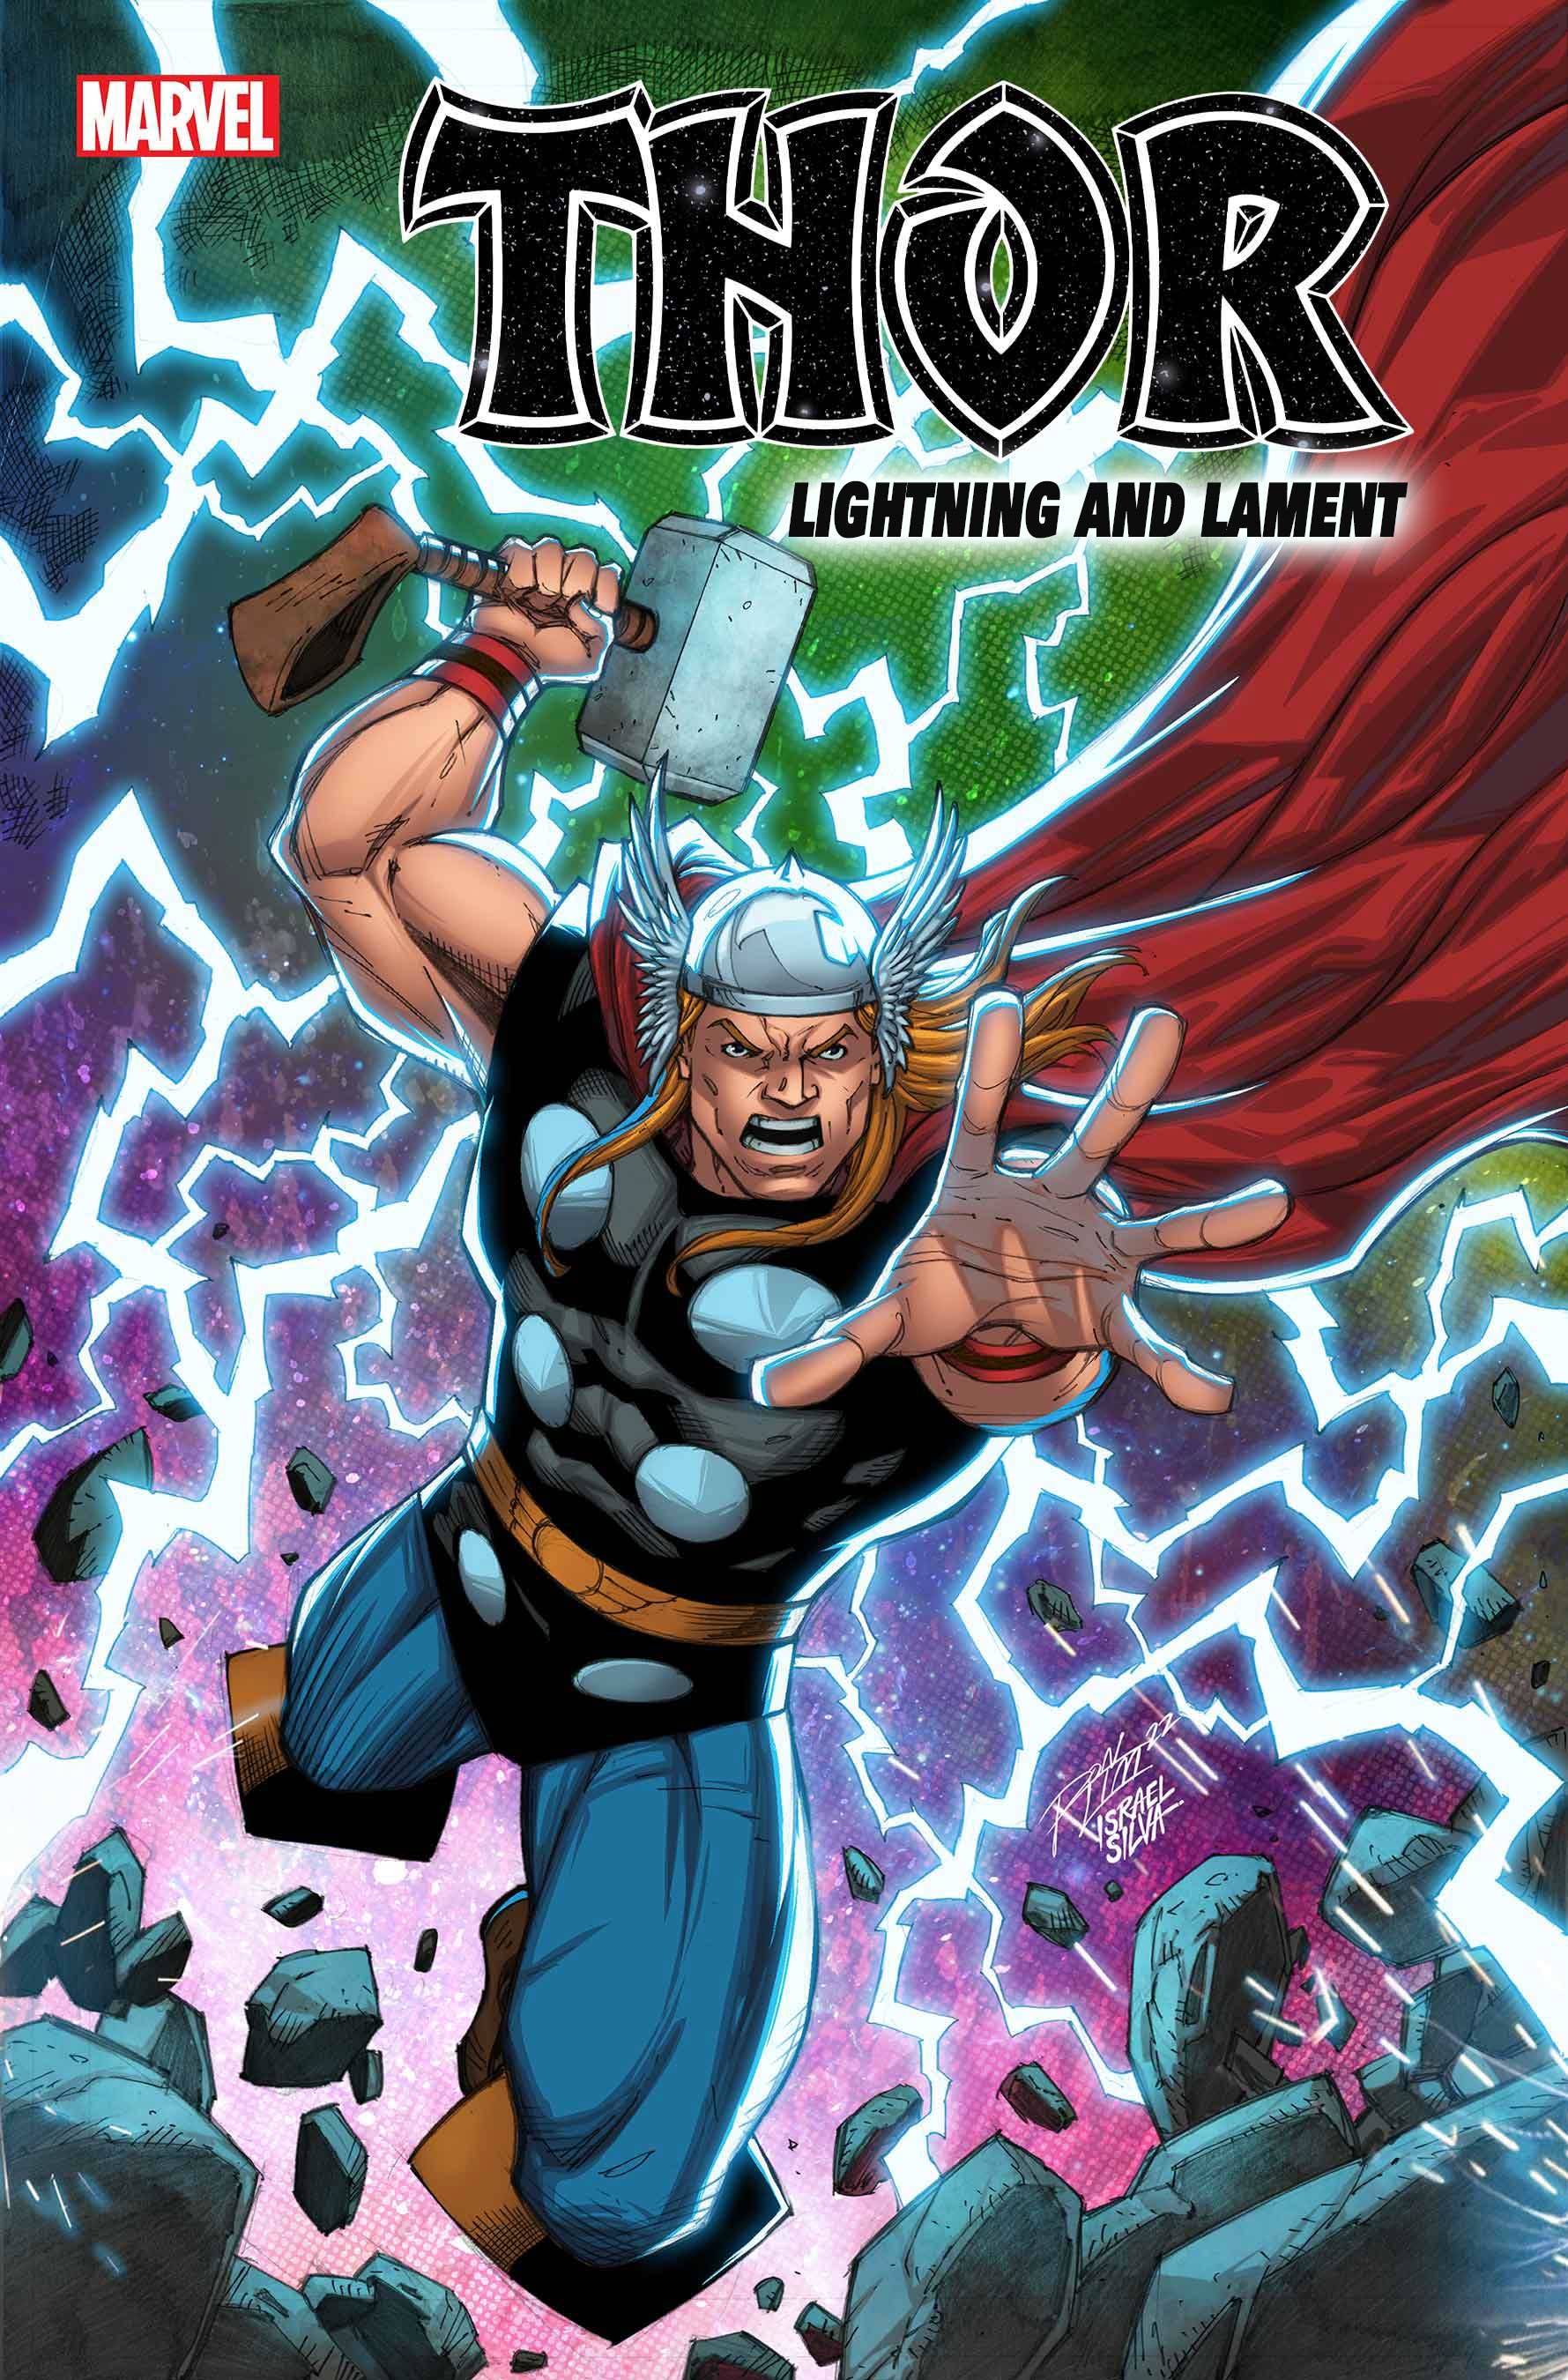 THOR LIGHTNING AND LAMENT #1